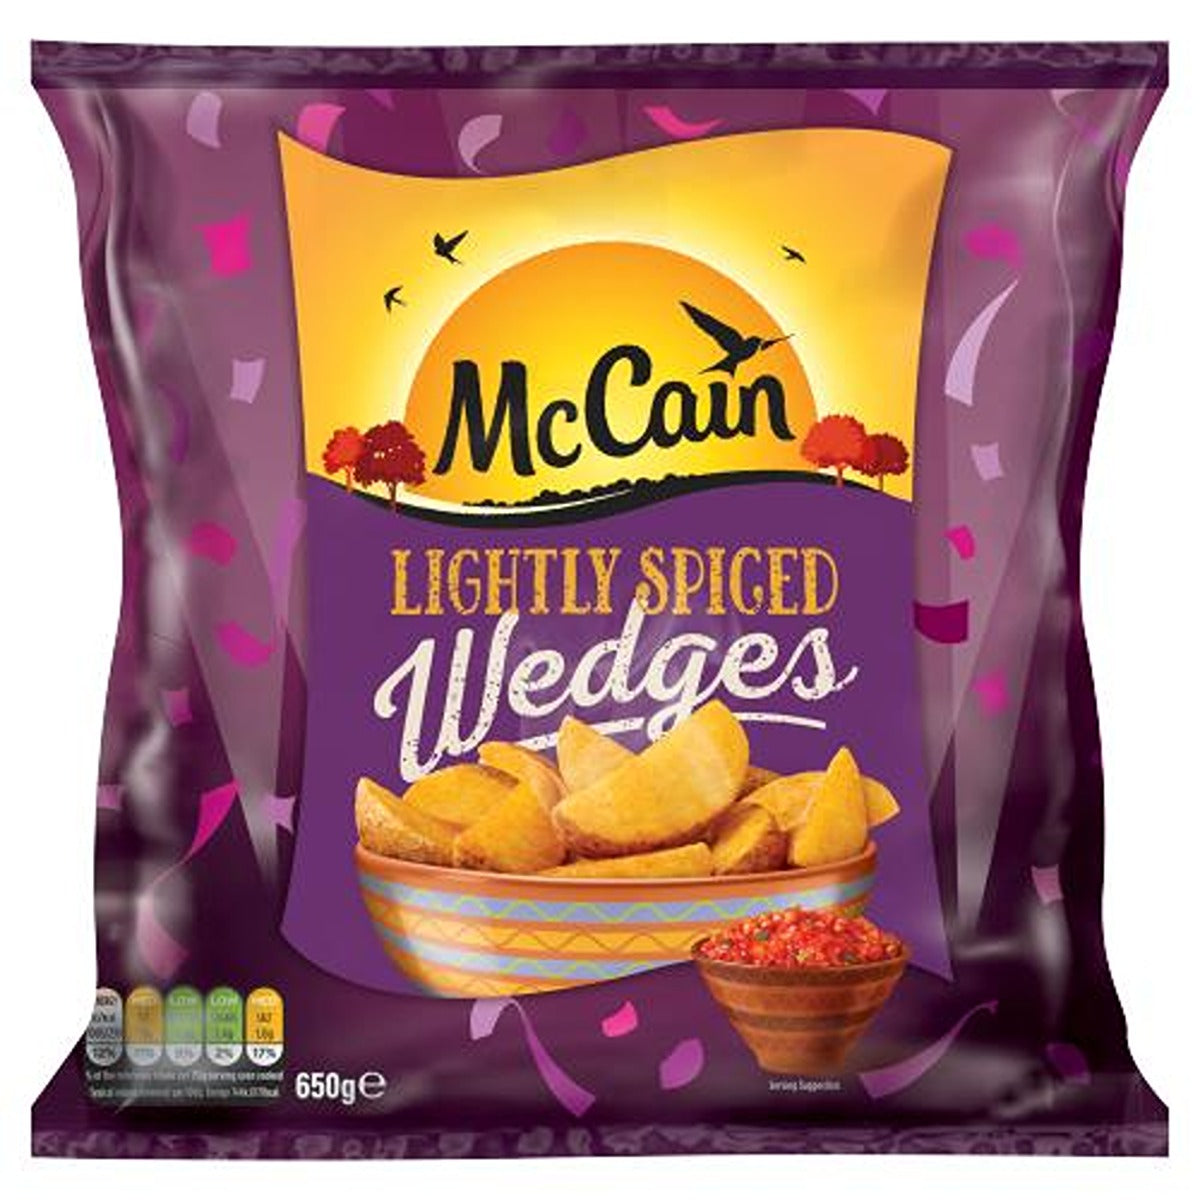 McCain - Lightly Spiced Wedges - 650g - Continental Food Store